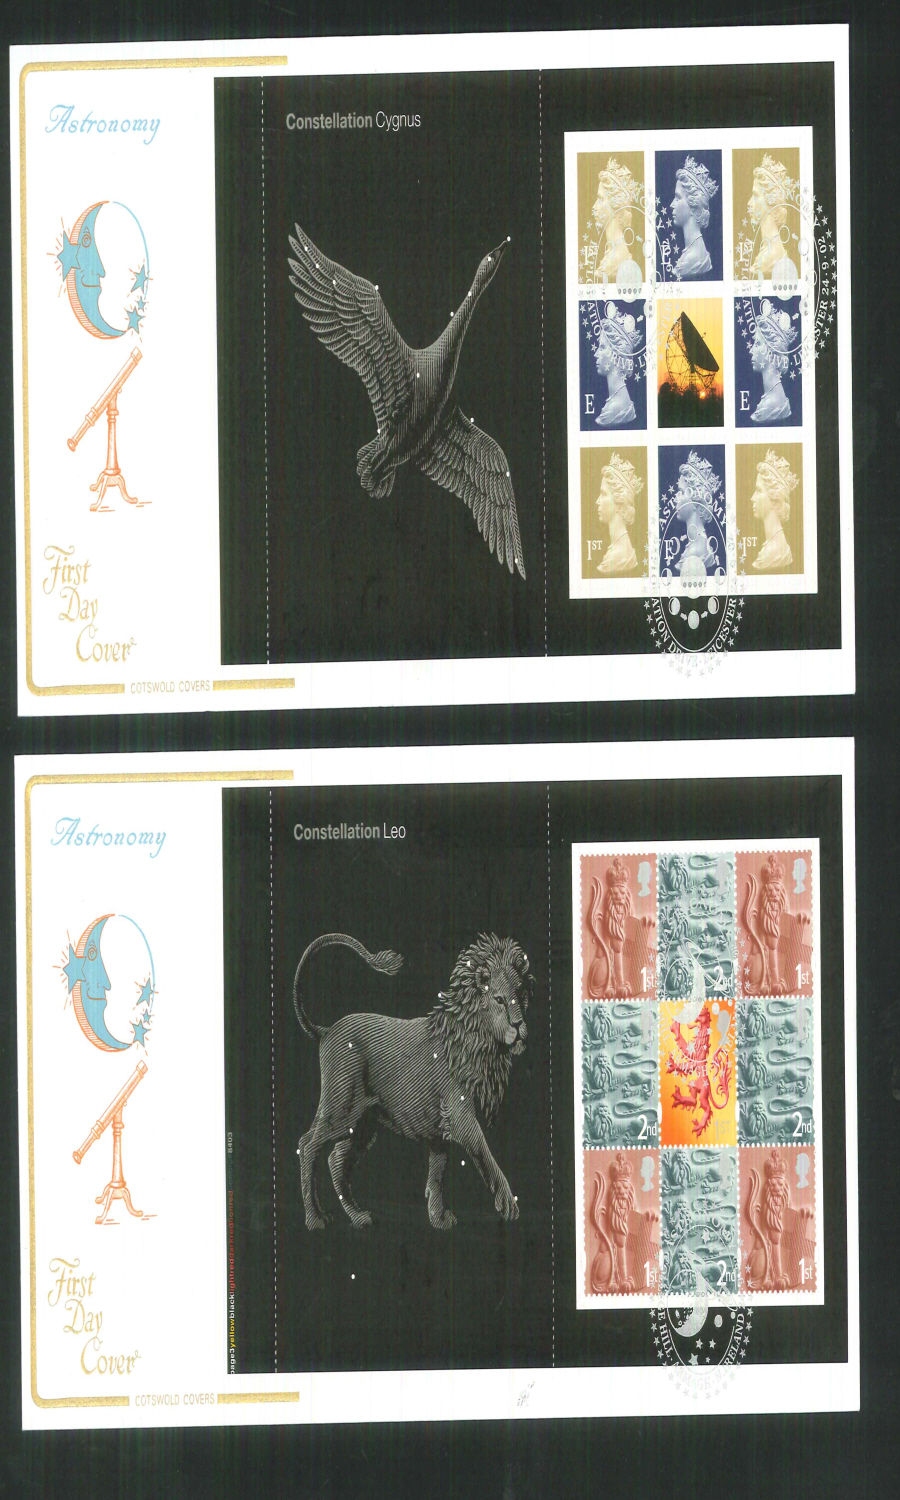 2002 - Cotswold Astronomy - Prestige Stamp Book Set of 4 Covers - Various Postmarks